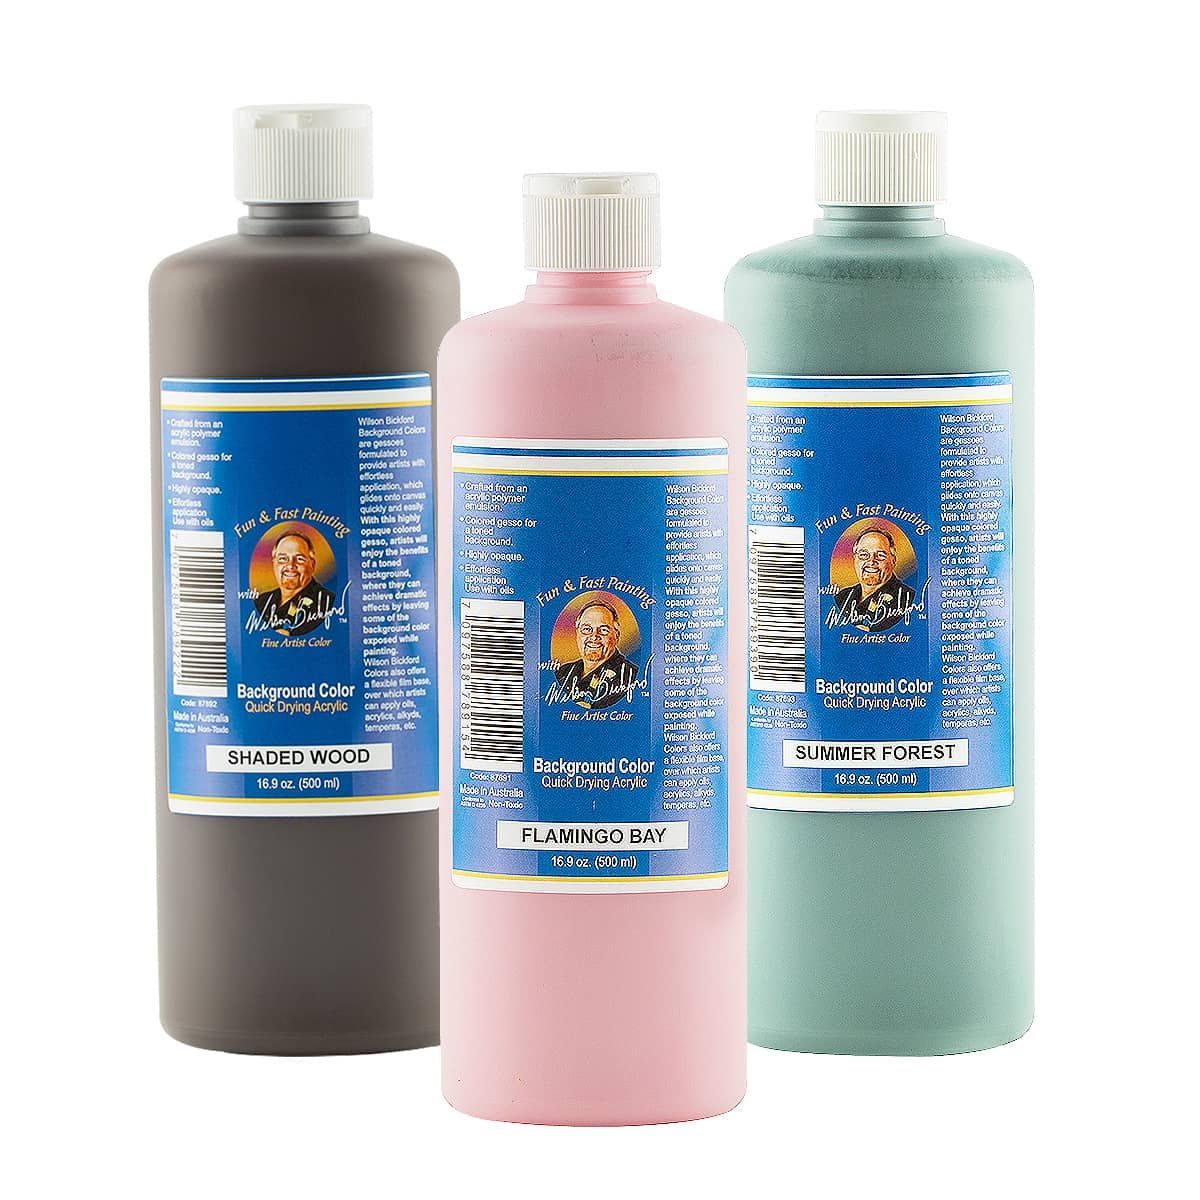 Background Colors - a Gesso formulated to provide artists with fast drying, beautiful, toned backgrounds